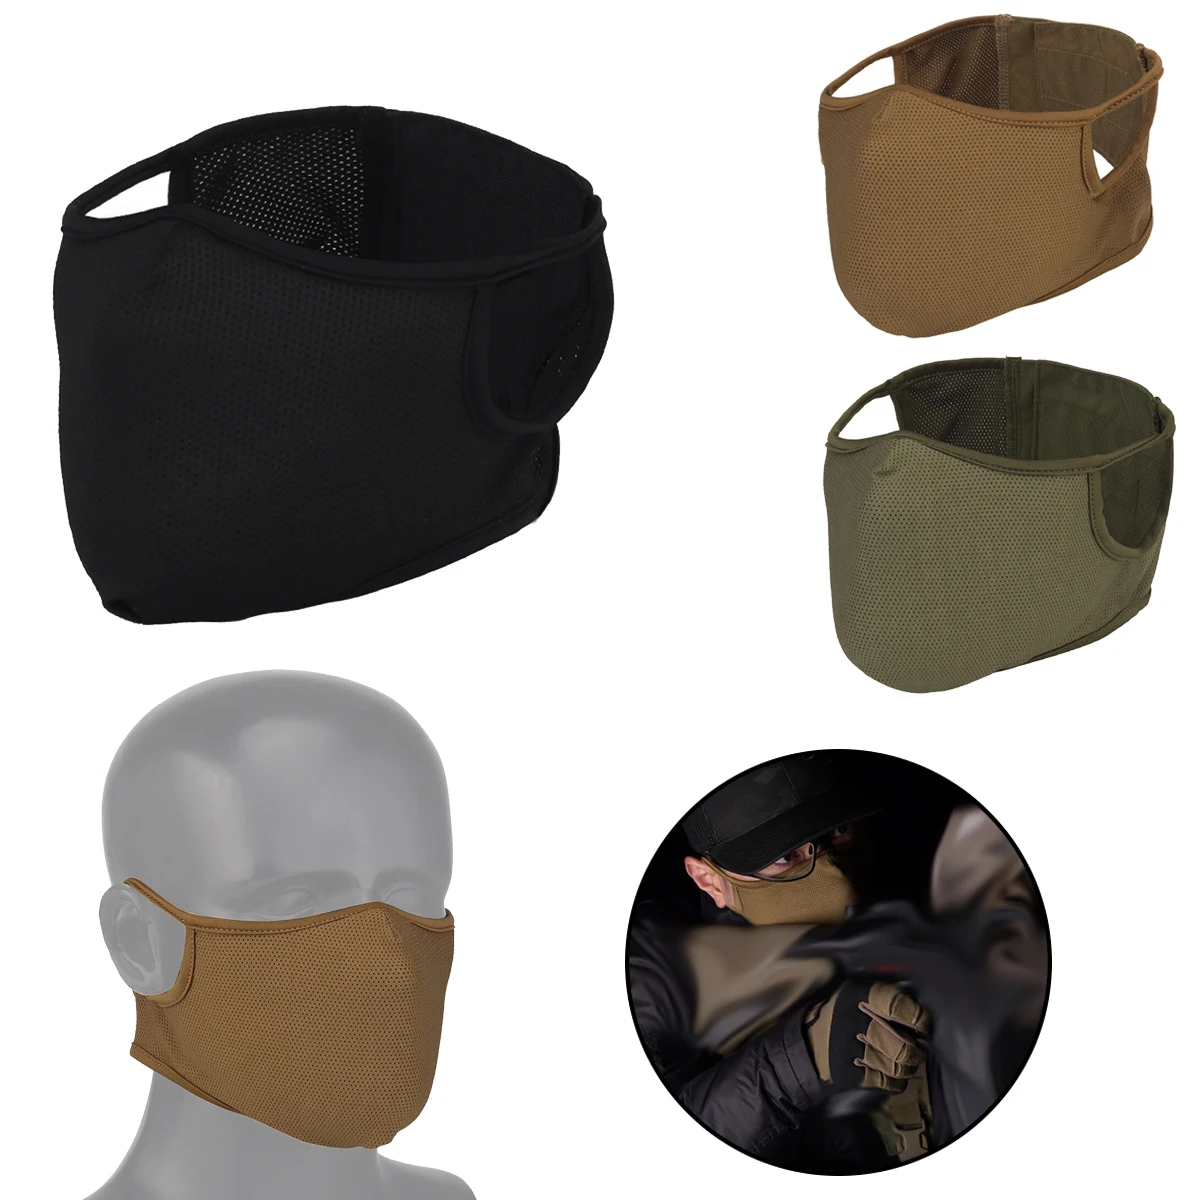 

Tactical Silicone Mask Mask Military Half Face Mask Multifunctional Breathable Face Shield Airsoft Paintball Hunting Accessories